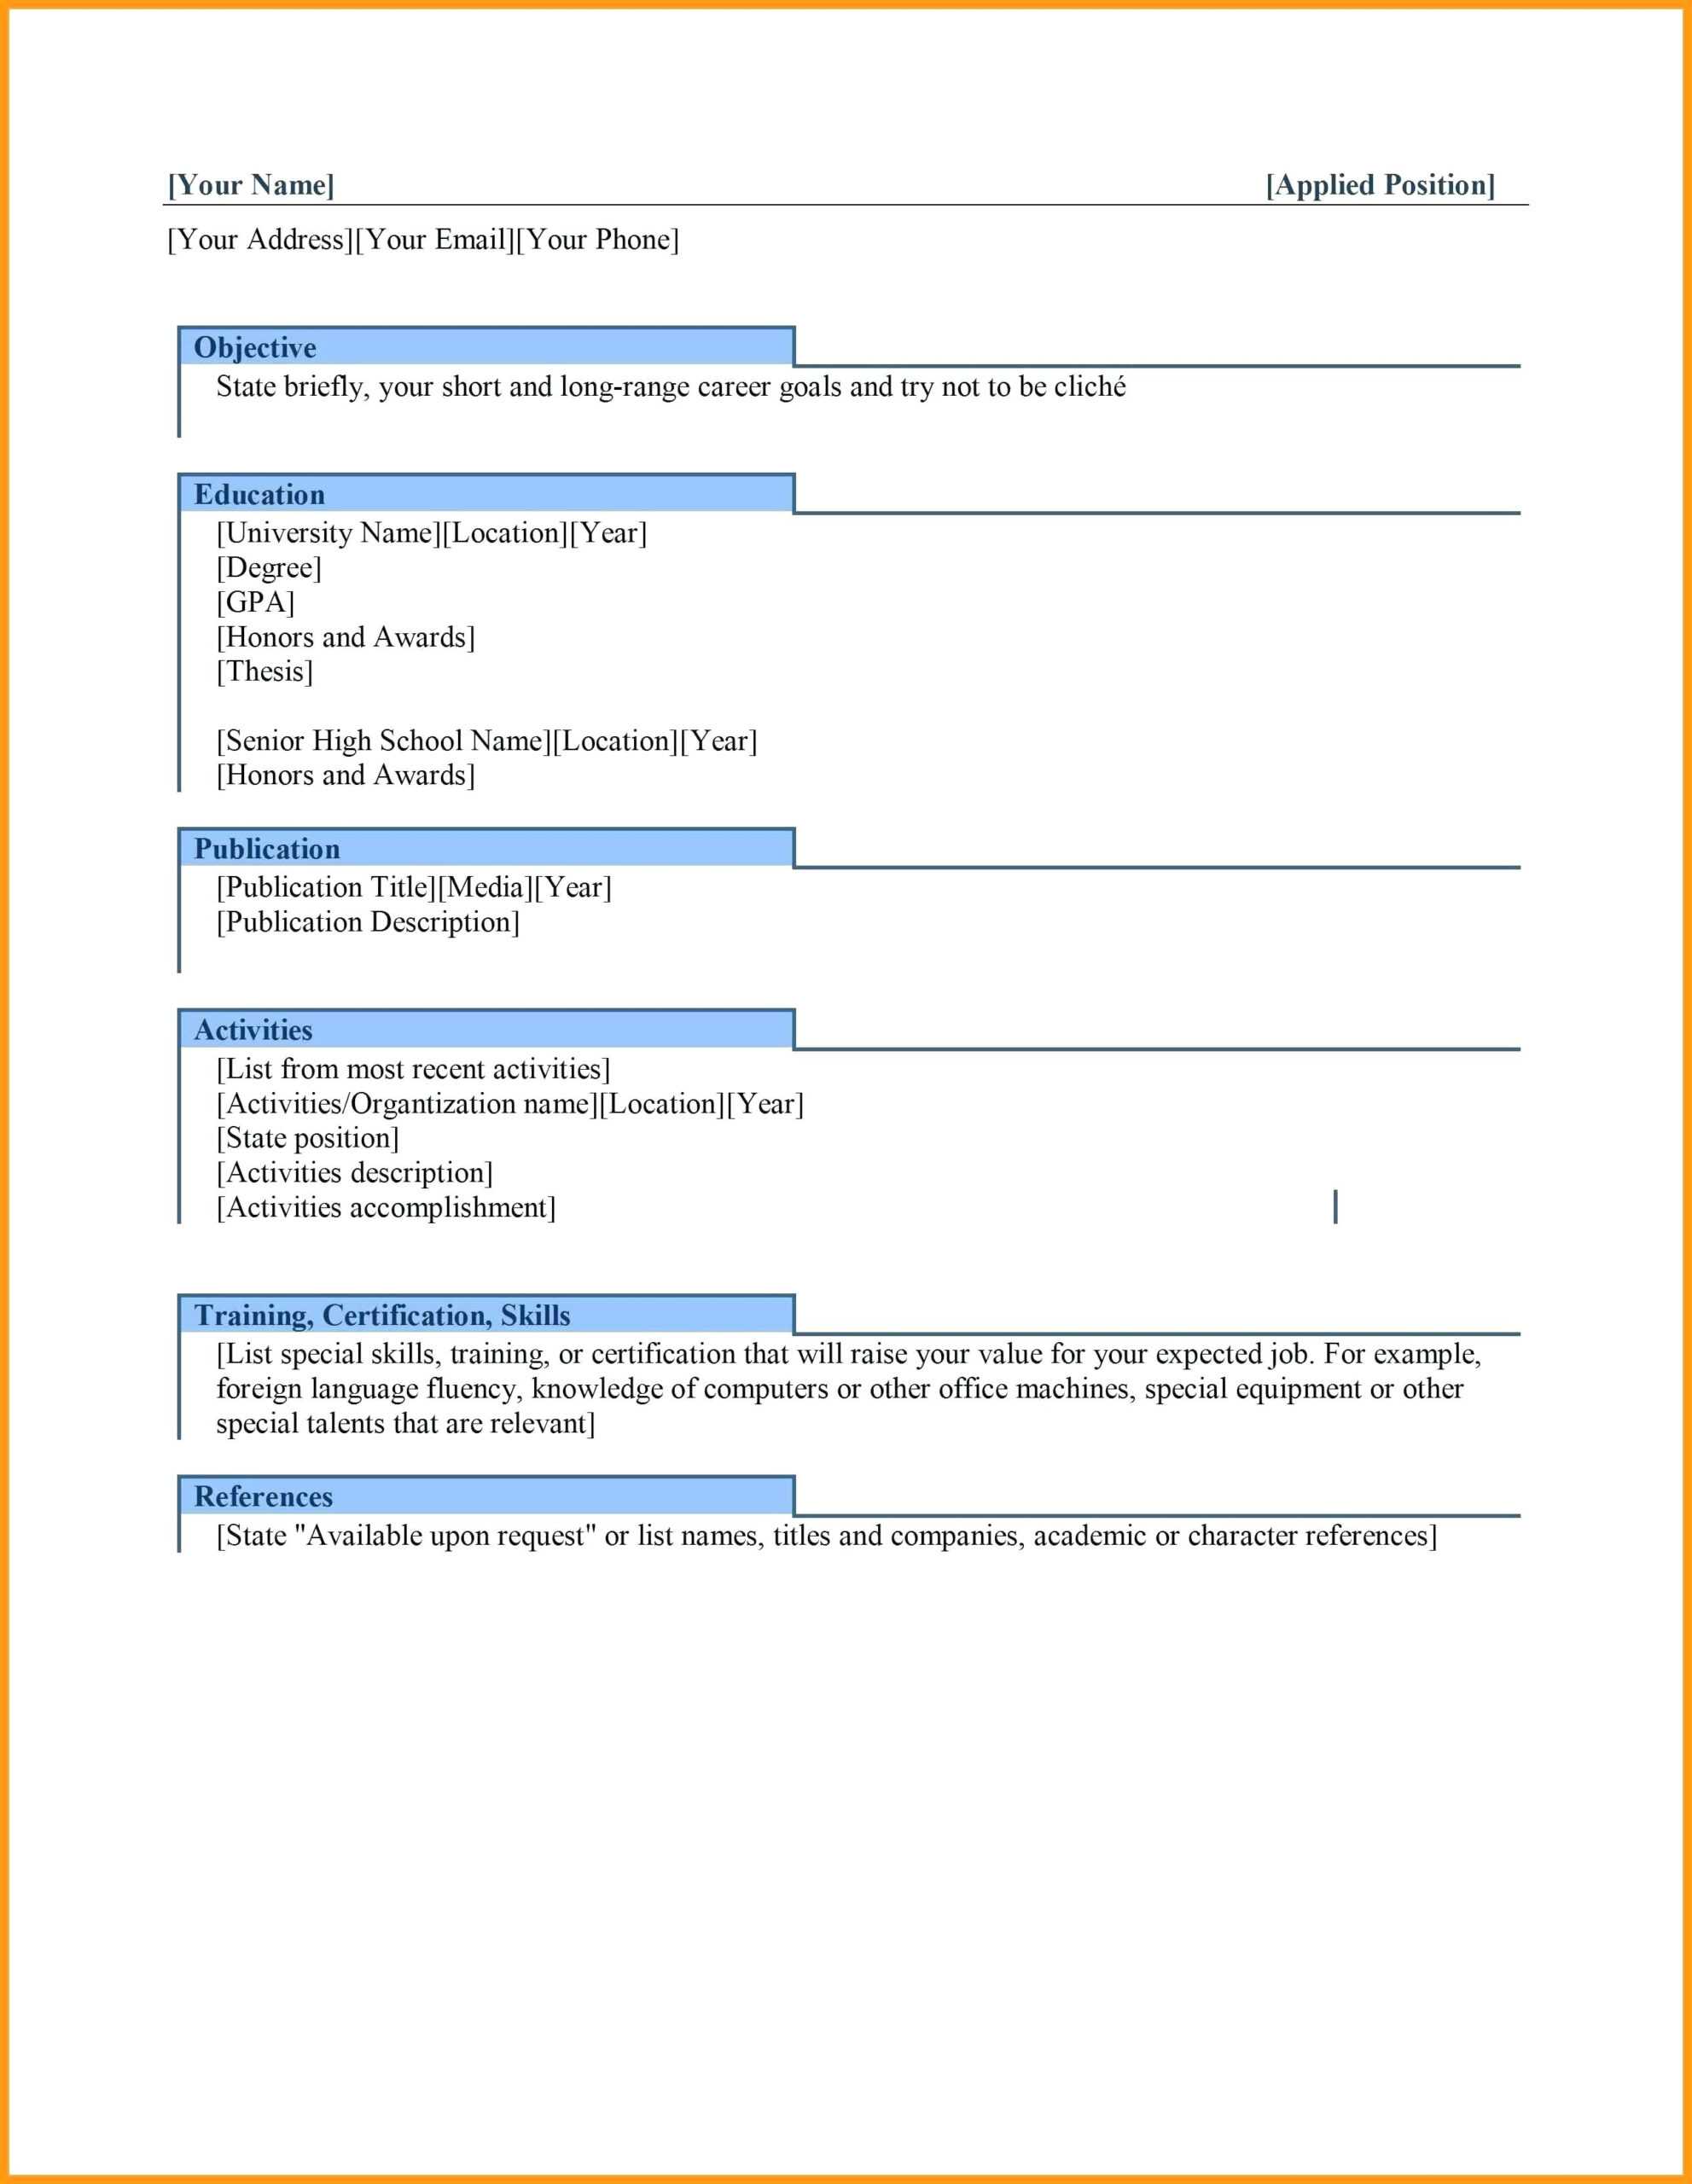 Memo Template Word 2010 – Wepage.co With Memo Template Word 2010